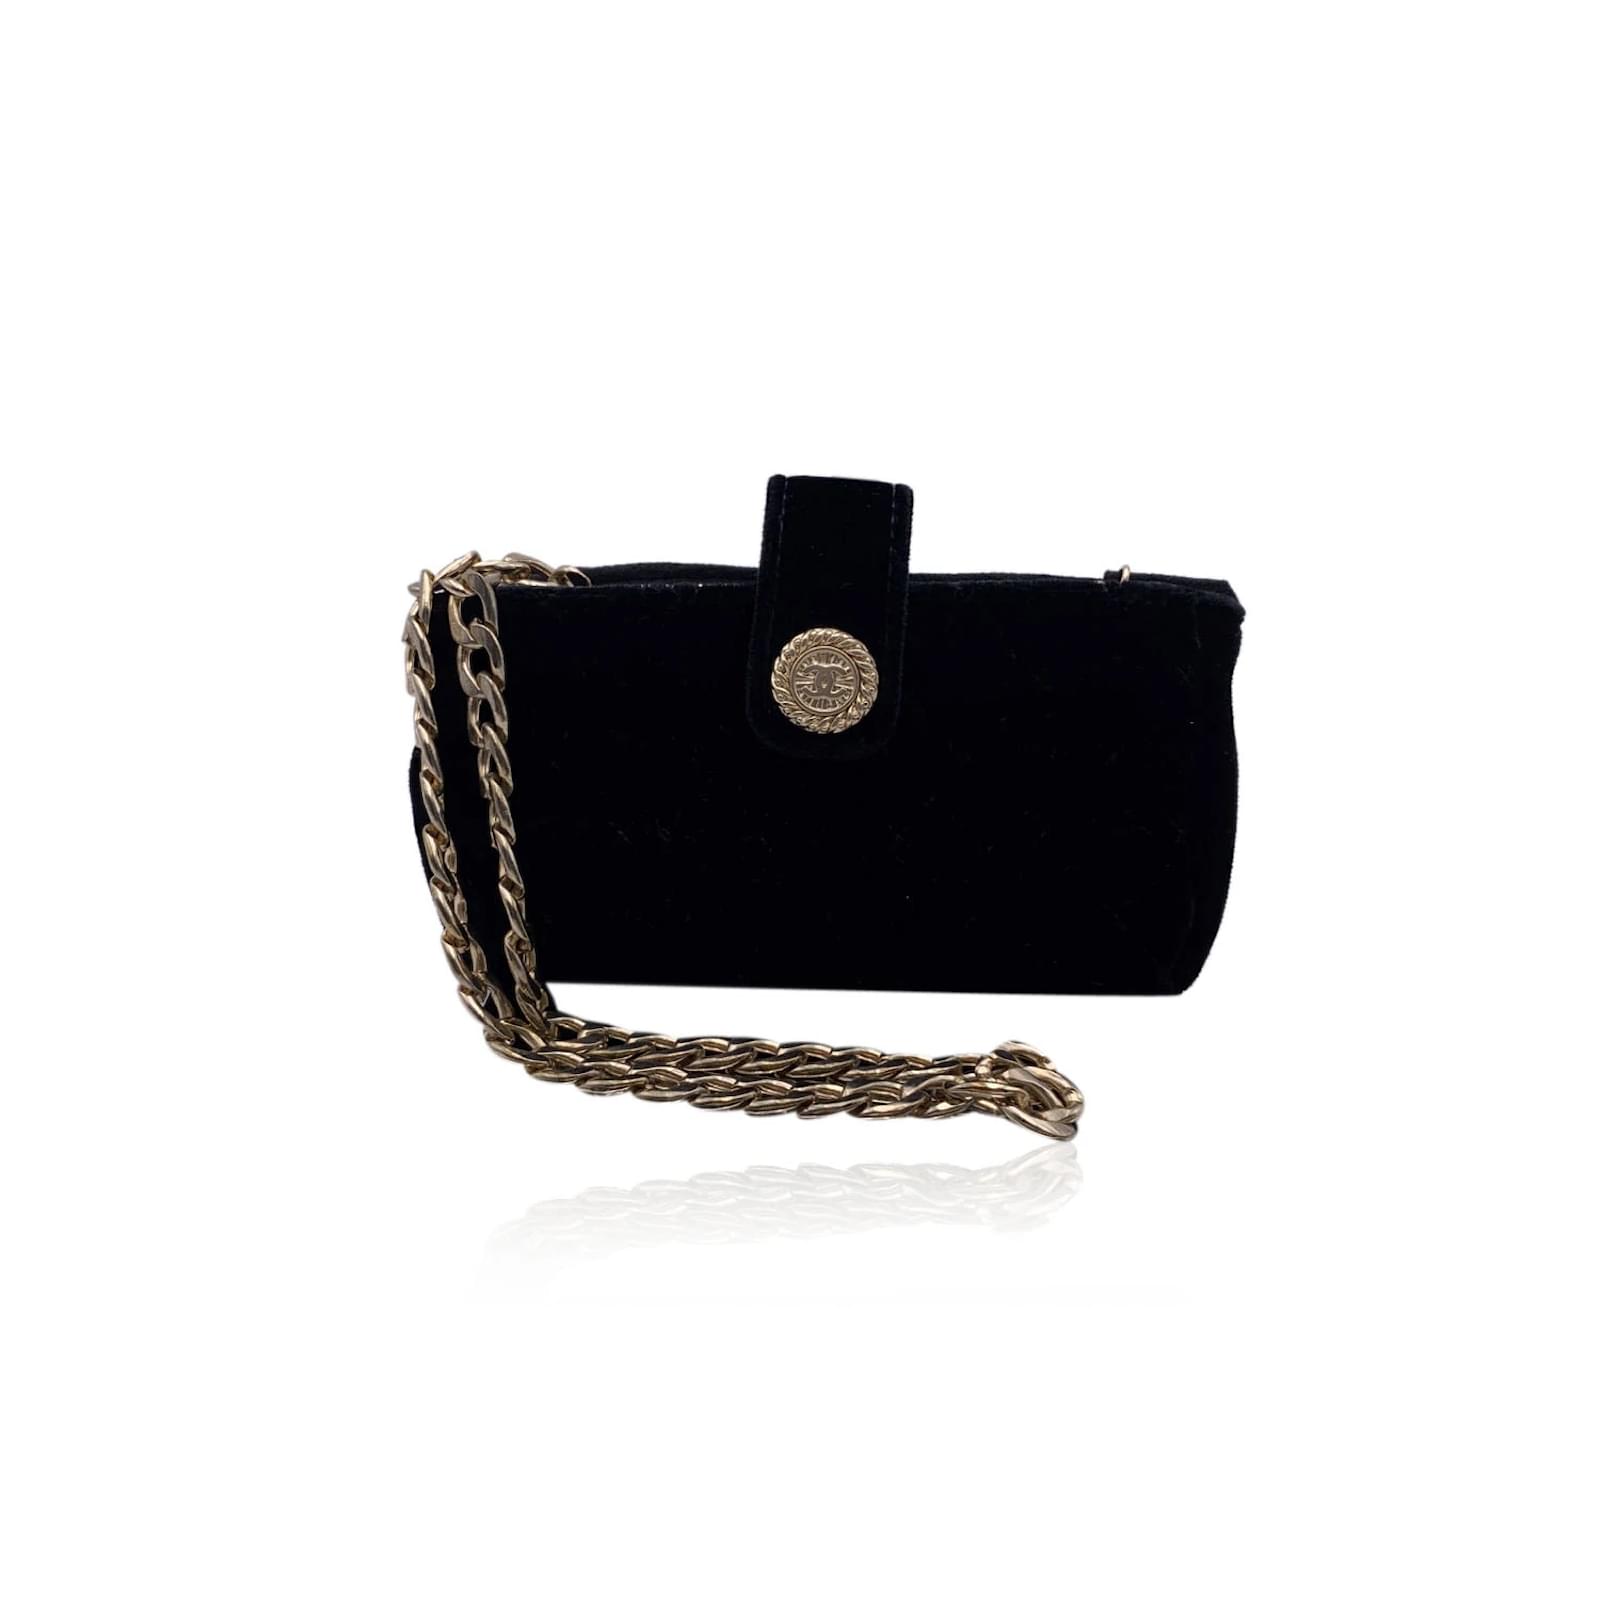 Chanel Black Velvet Quilted Leather Mini Pouch Bag with Chain ref